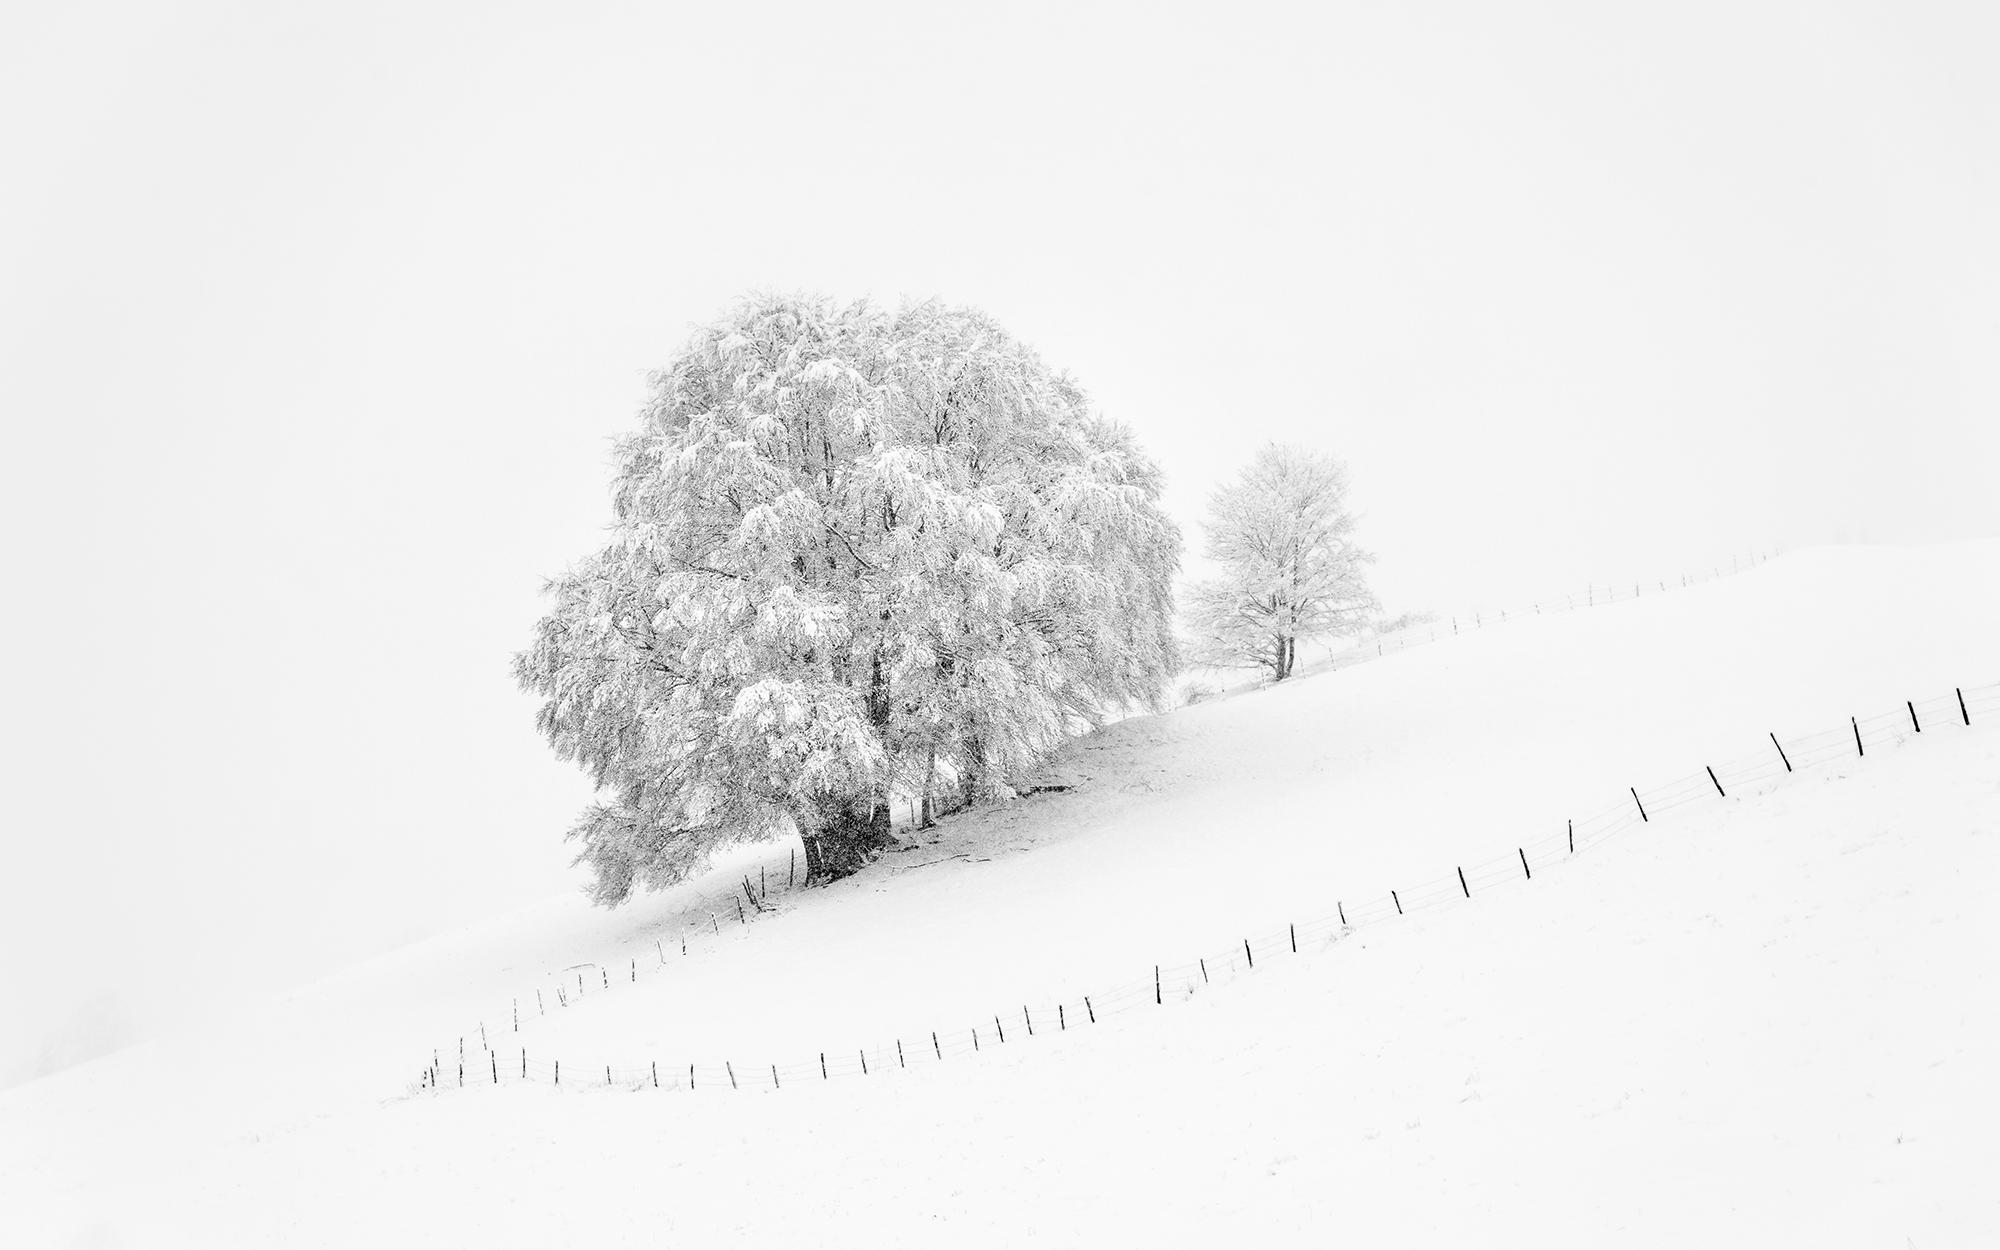 Adriana Benetti Longhini Landscape Photograph - My Lady in White- 21st Century Contemporary Landscape photography